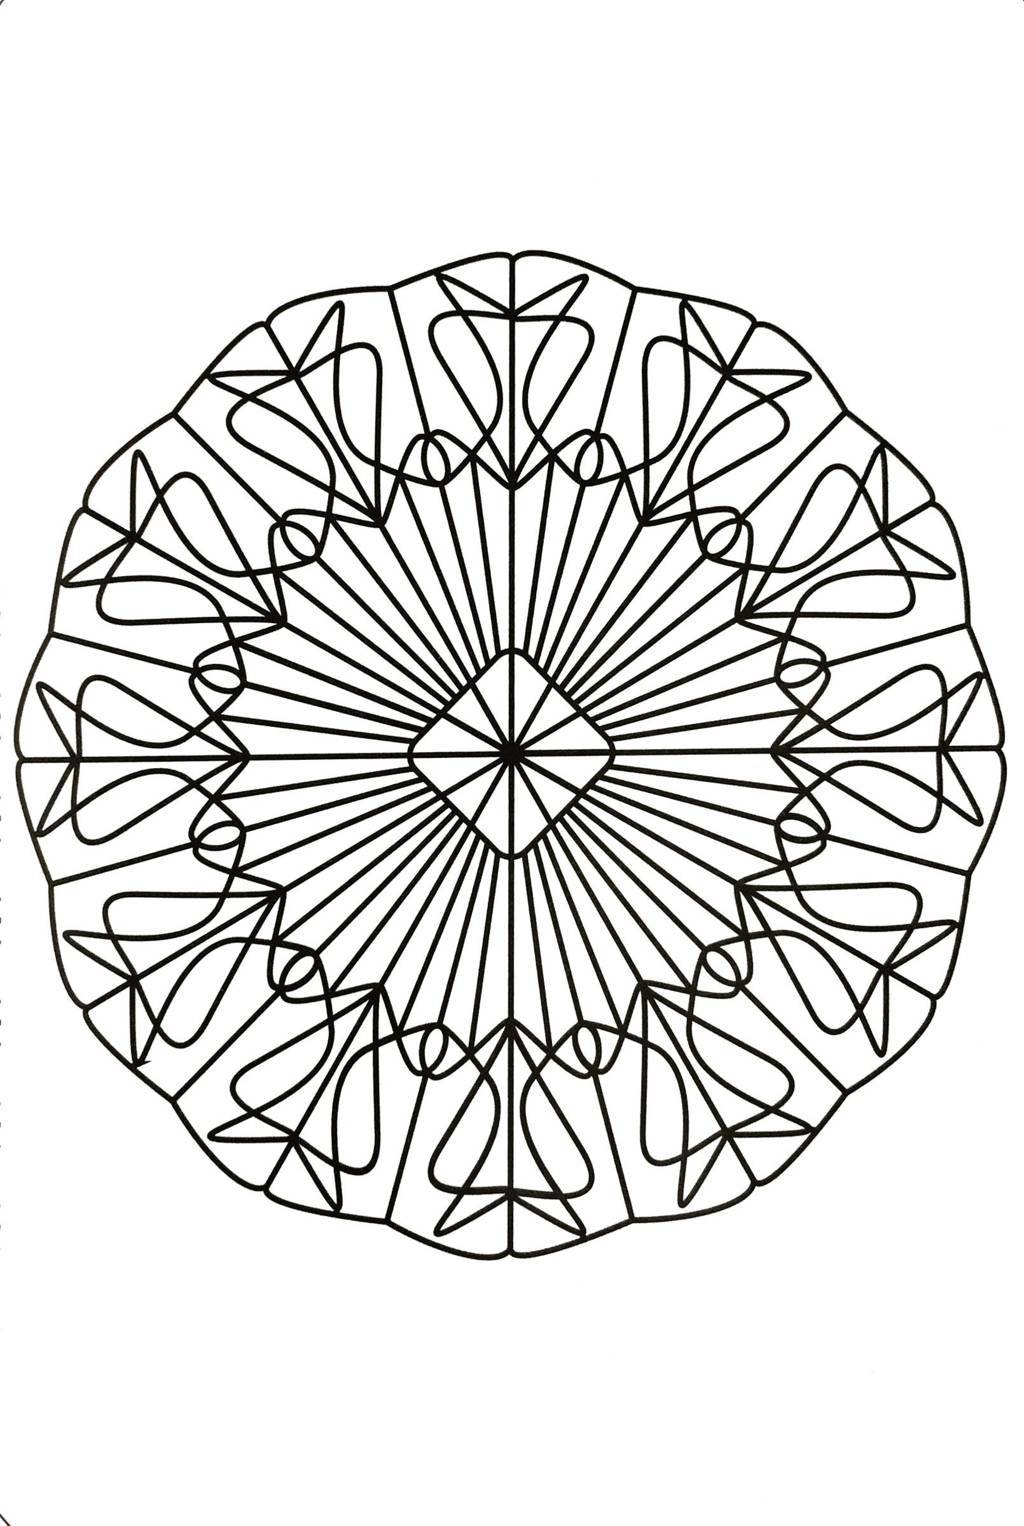 Mandalas To Download For Free 27 Coloring Page